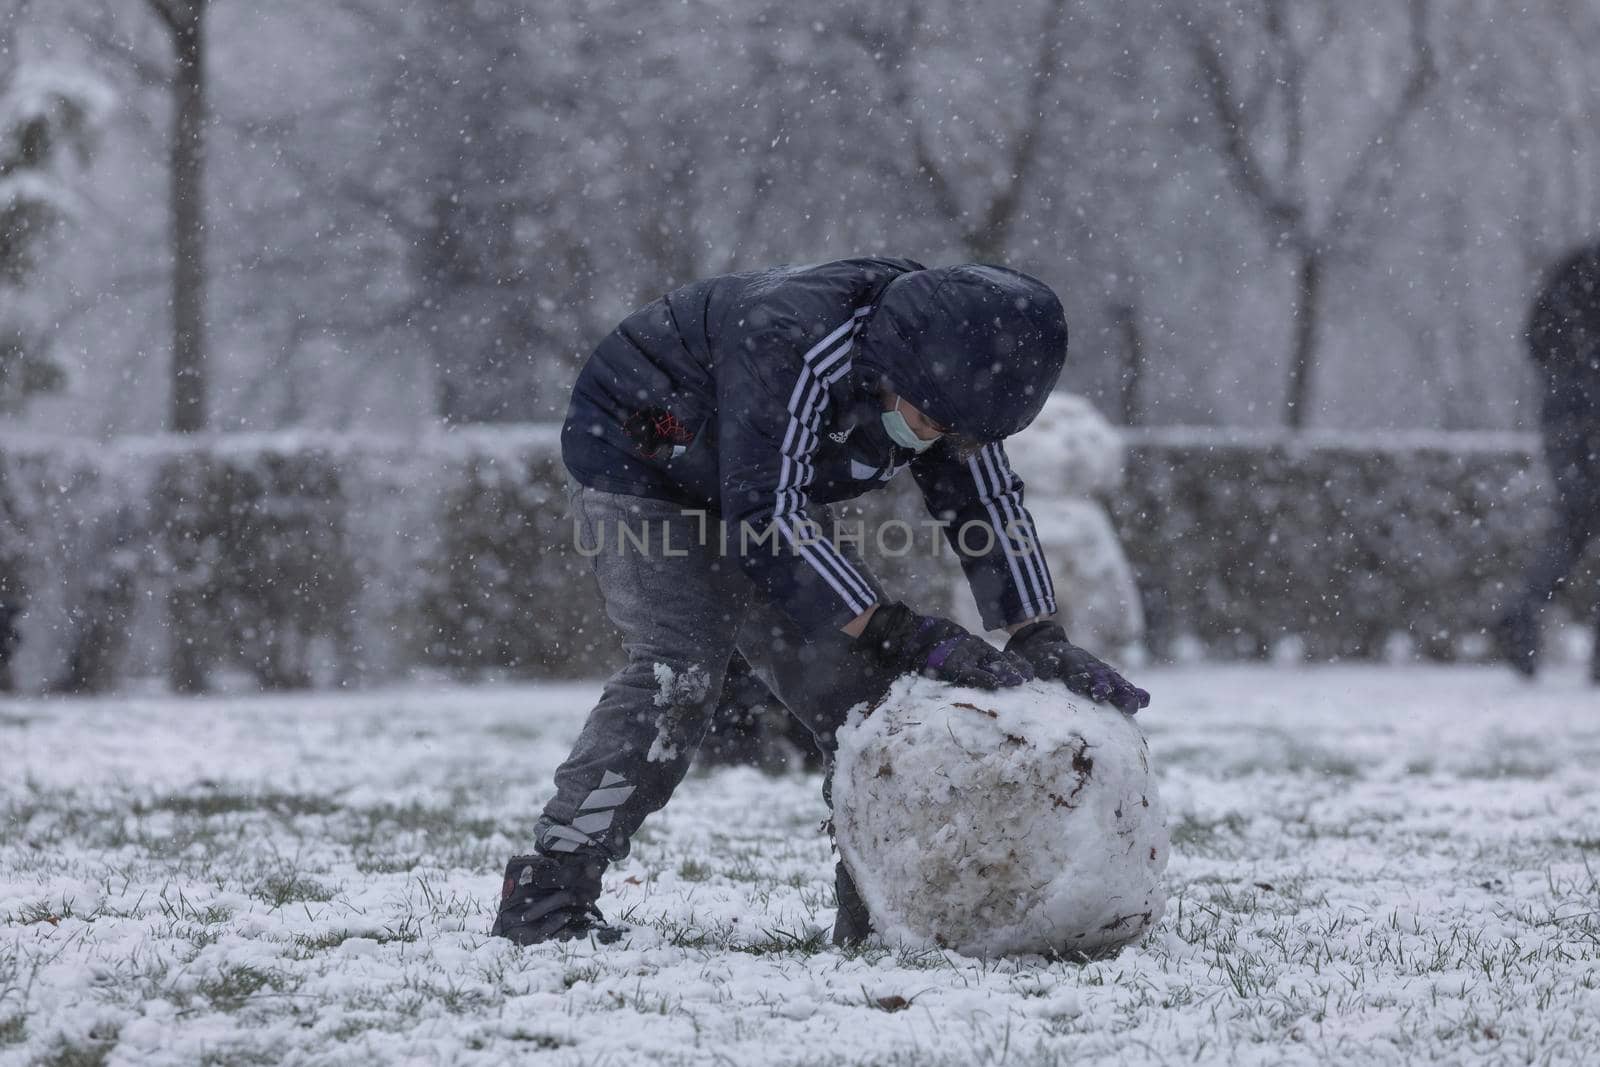 Madrid, Spain - January 07, 2021: Children playing with snow and making snowmen, in the Buen Retiro park in Madrid, in the middle of a snowy day, due to a wave of polar cold.